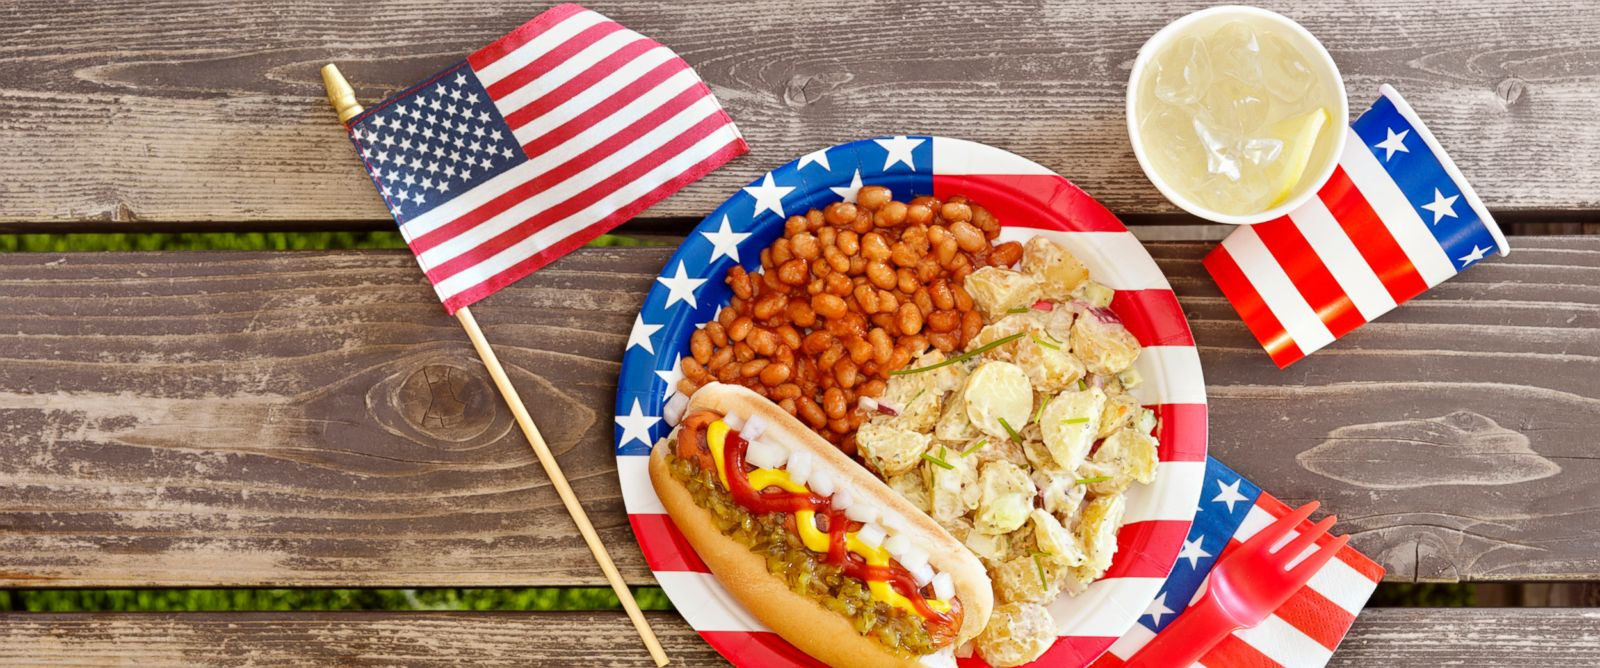 Free Food For Memorial Day
 A few precautions could help keep your Memorial Day